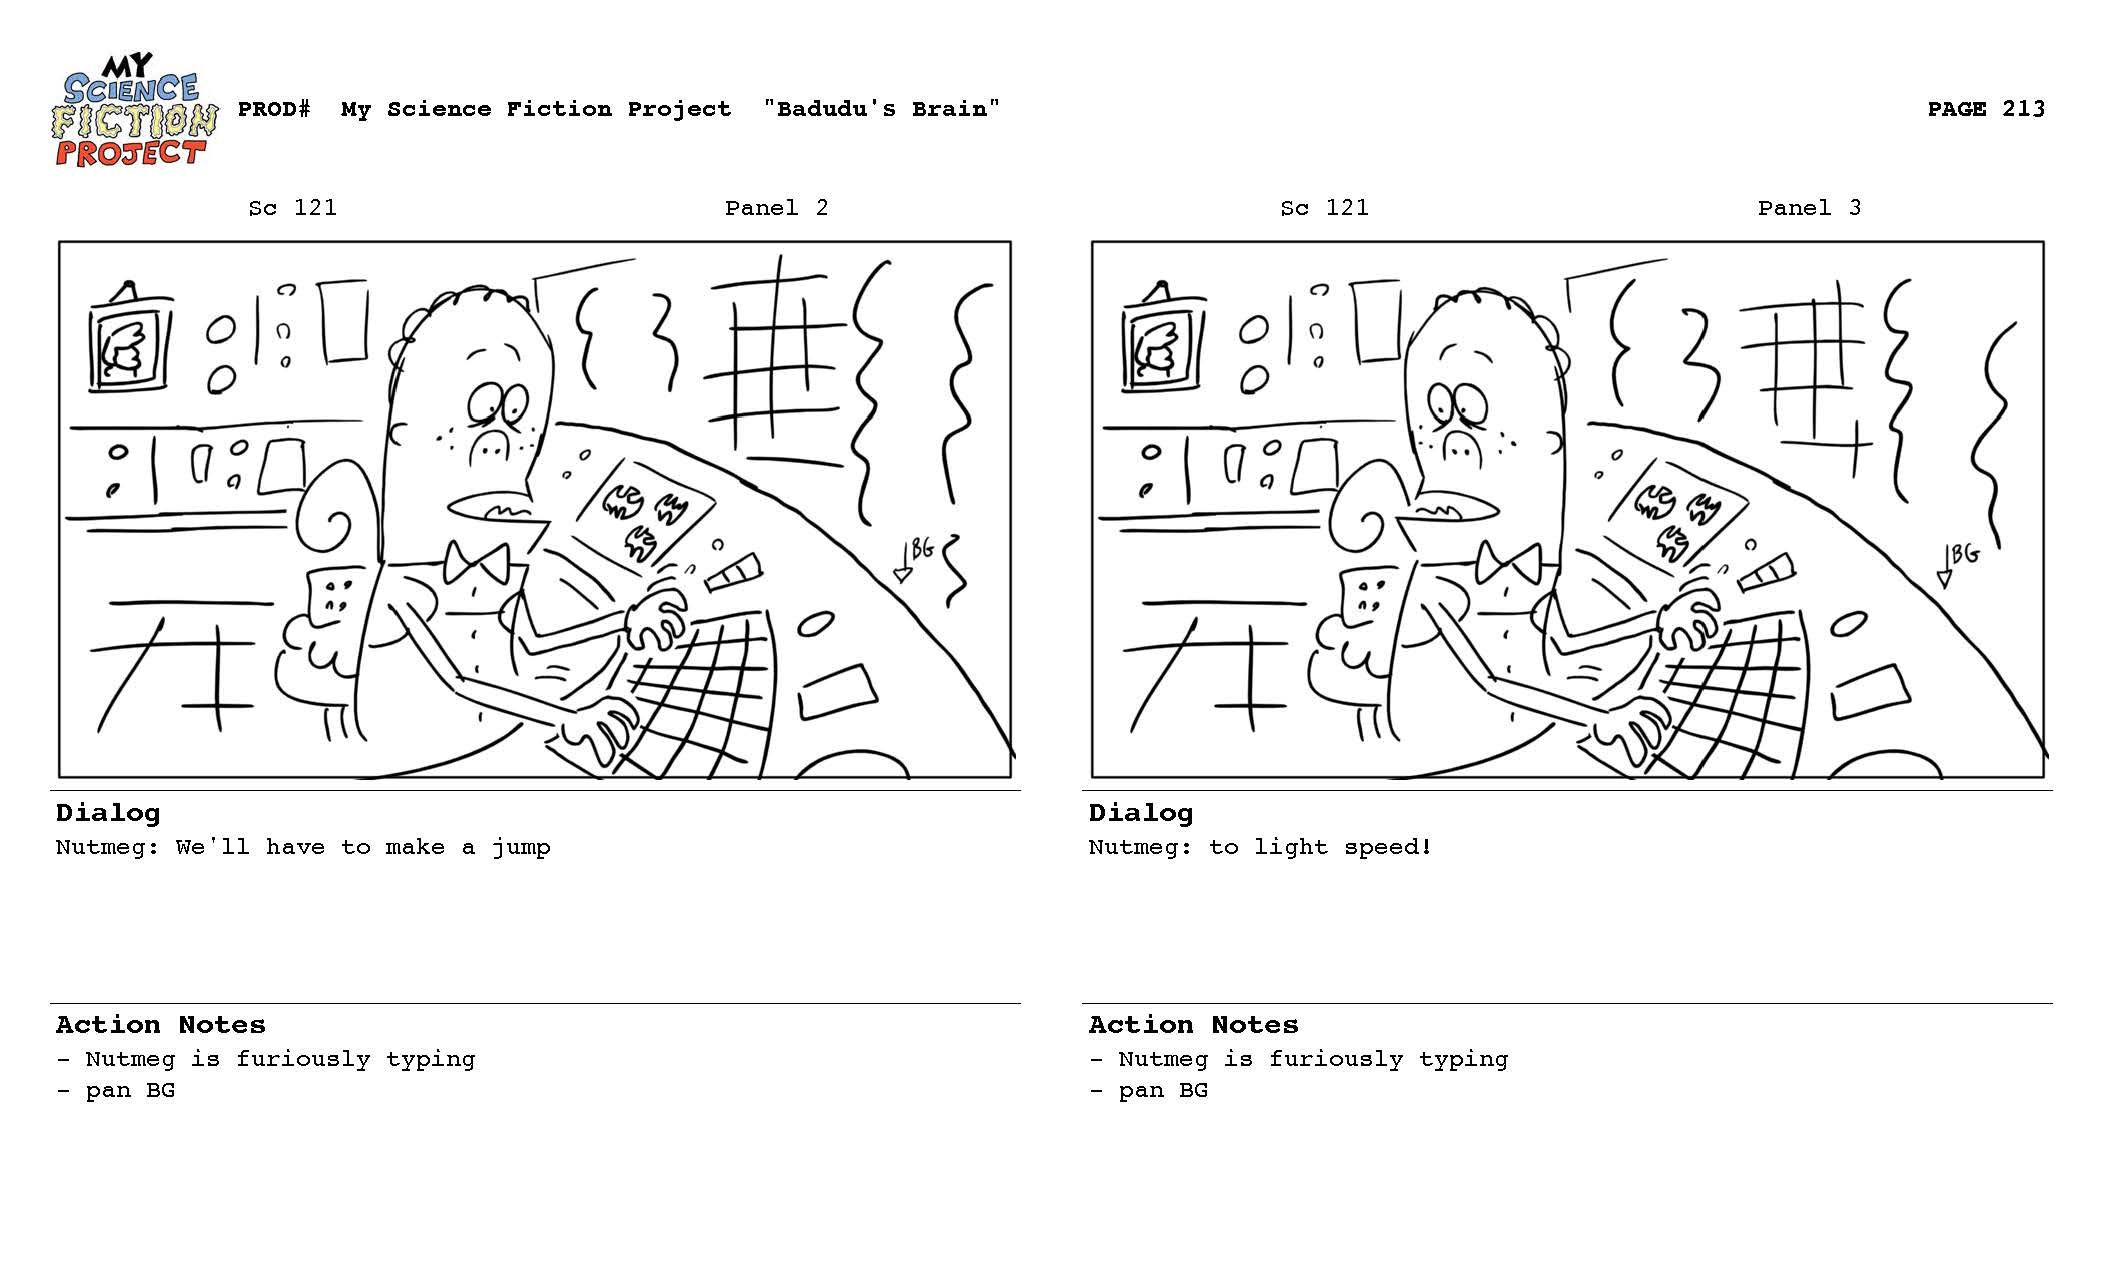 My_Science_Fiction_Project_SB_083112_reduced_Page_213.jpg